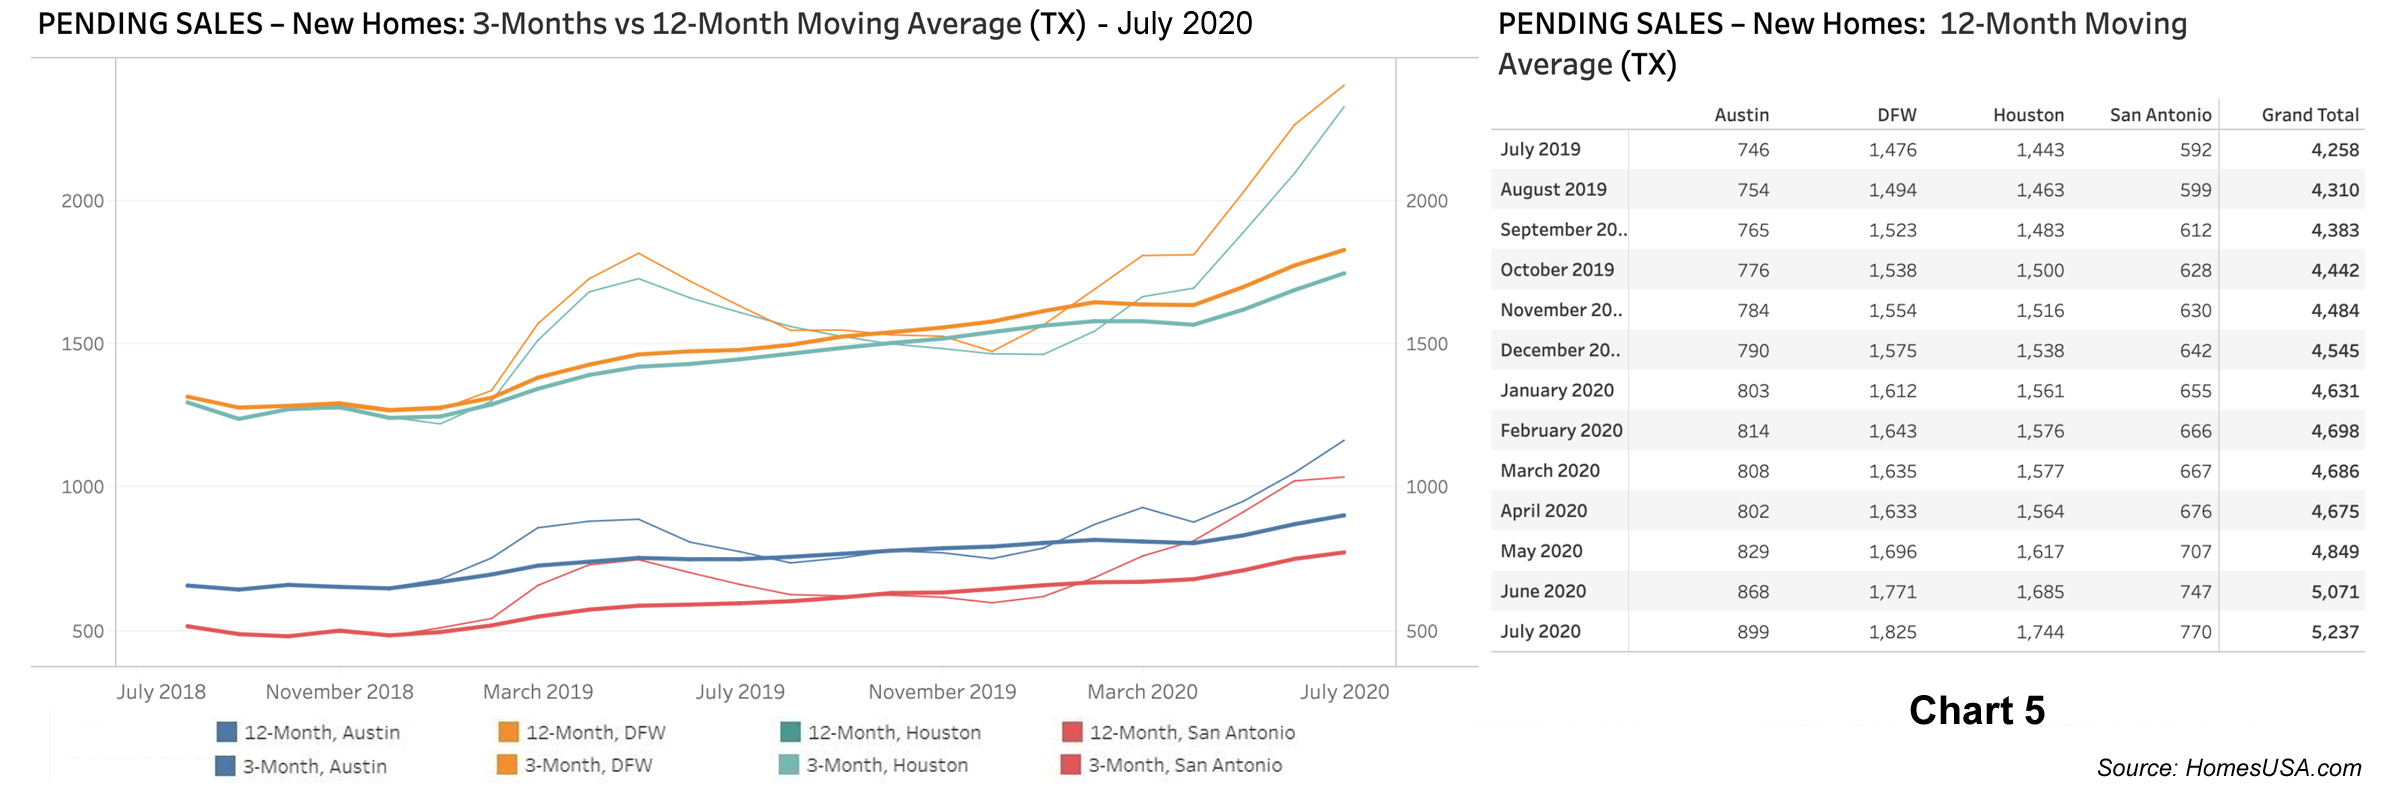 Chart 5: Texas Pending New Homes Sales - July 2020